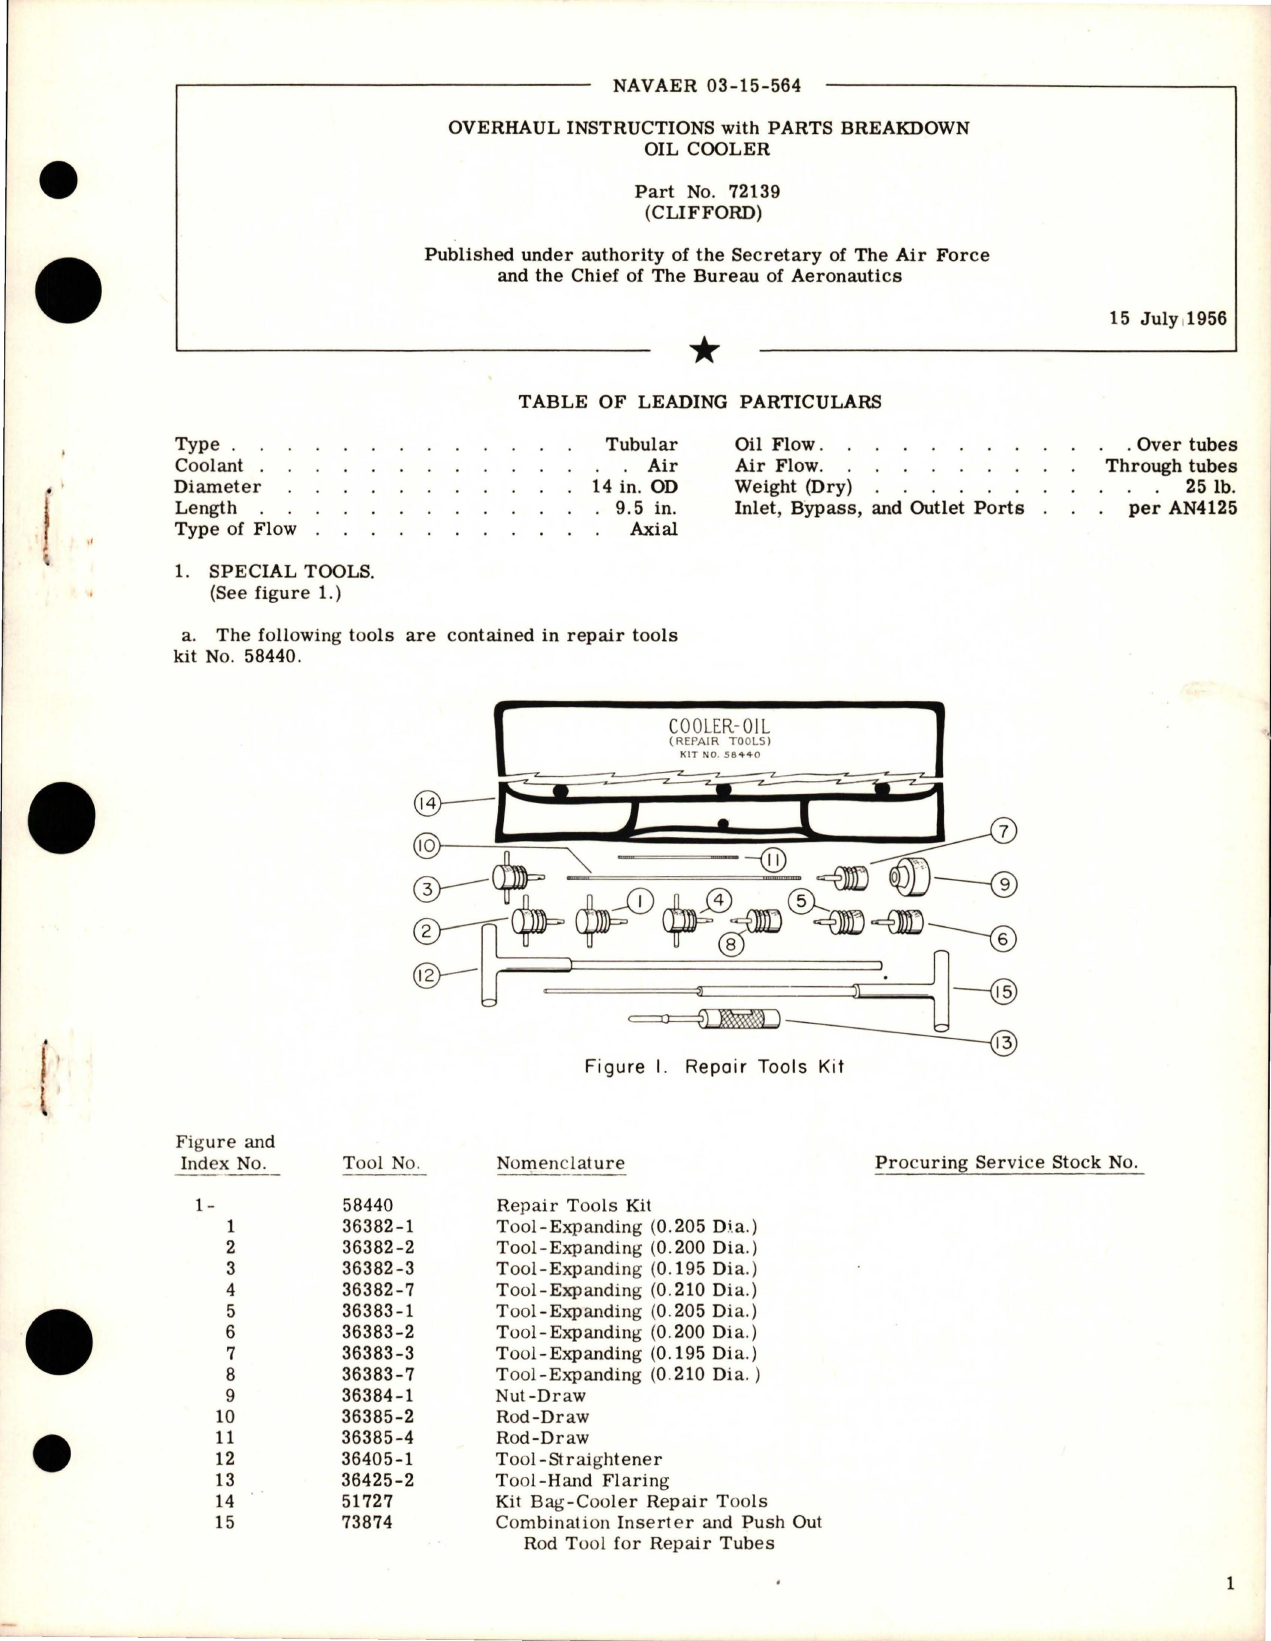 Sample page 1 from AirCorps Library document: Overhaul Instructions with Parts Breakdown for Oil Cooler - Part 72139 